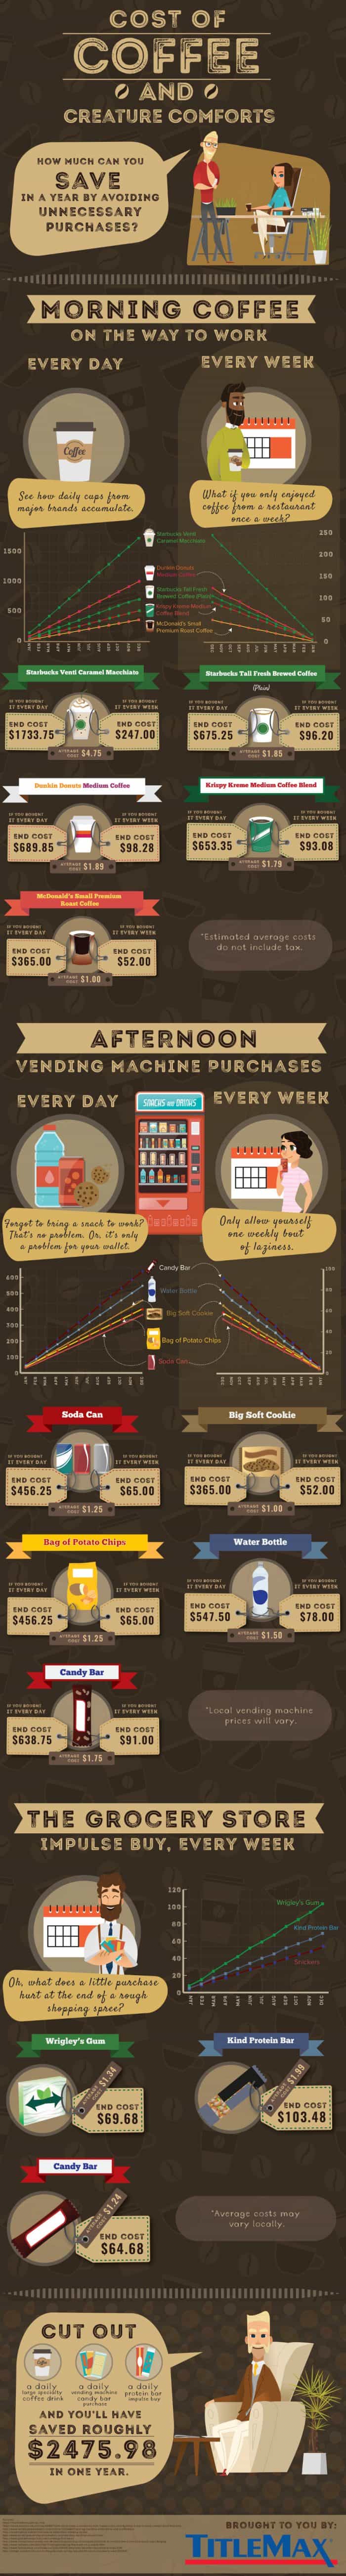 Infographic about average yearly spending on coffee and other snacks